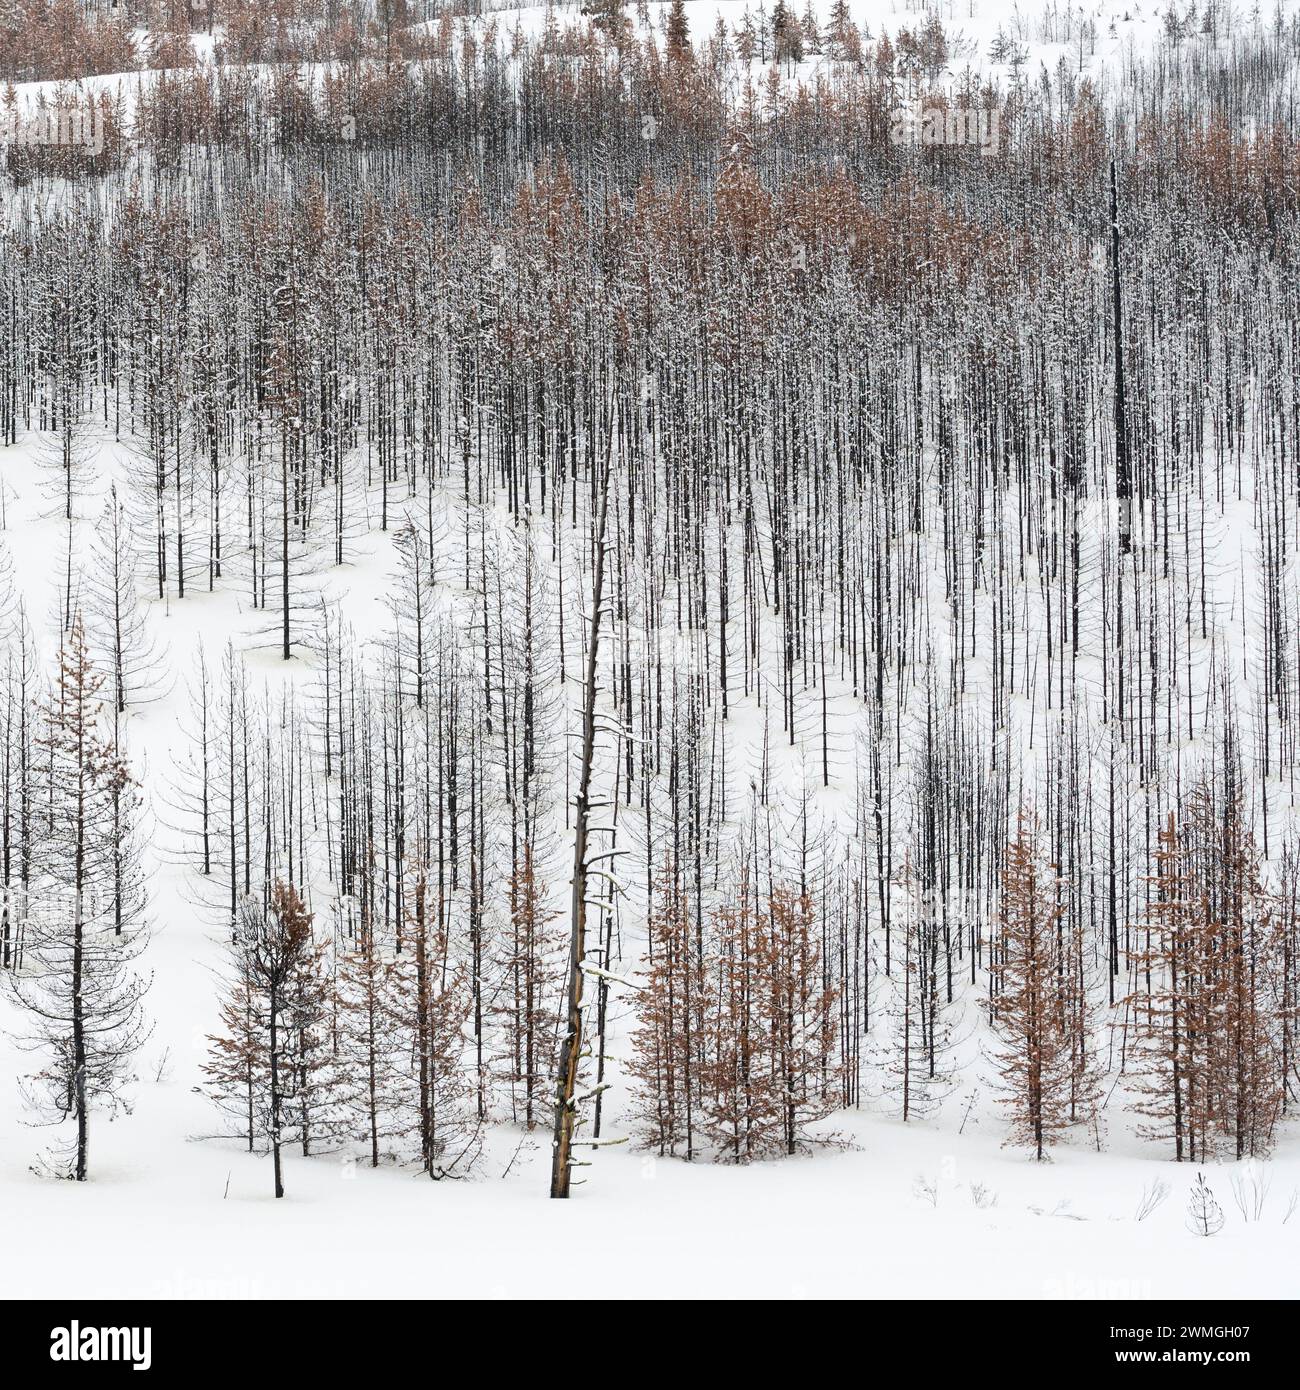 Dead forest, trees, woods in winter, nearly monochrome structures, Grand Teton National Park, Wyoming, USA. Stock Photo